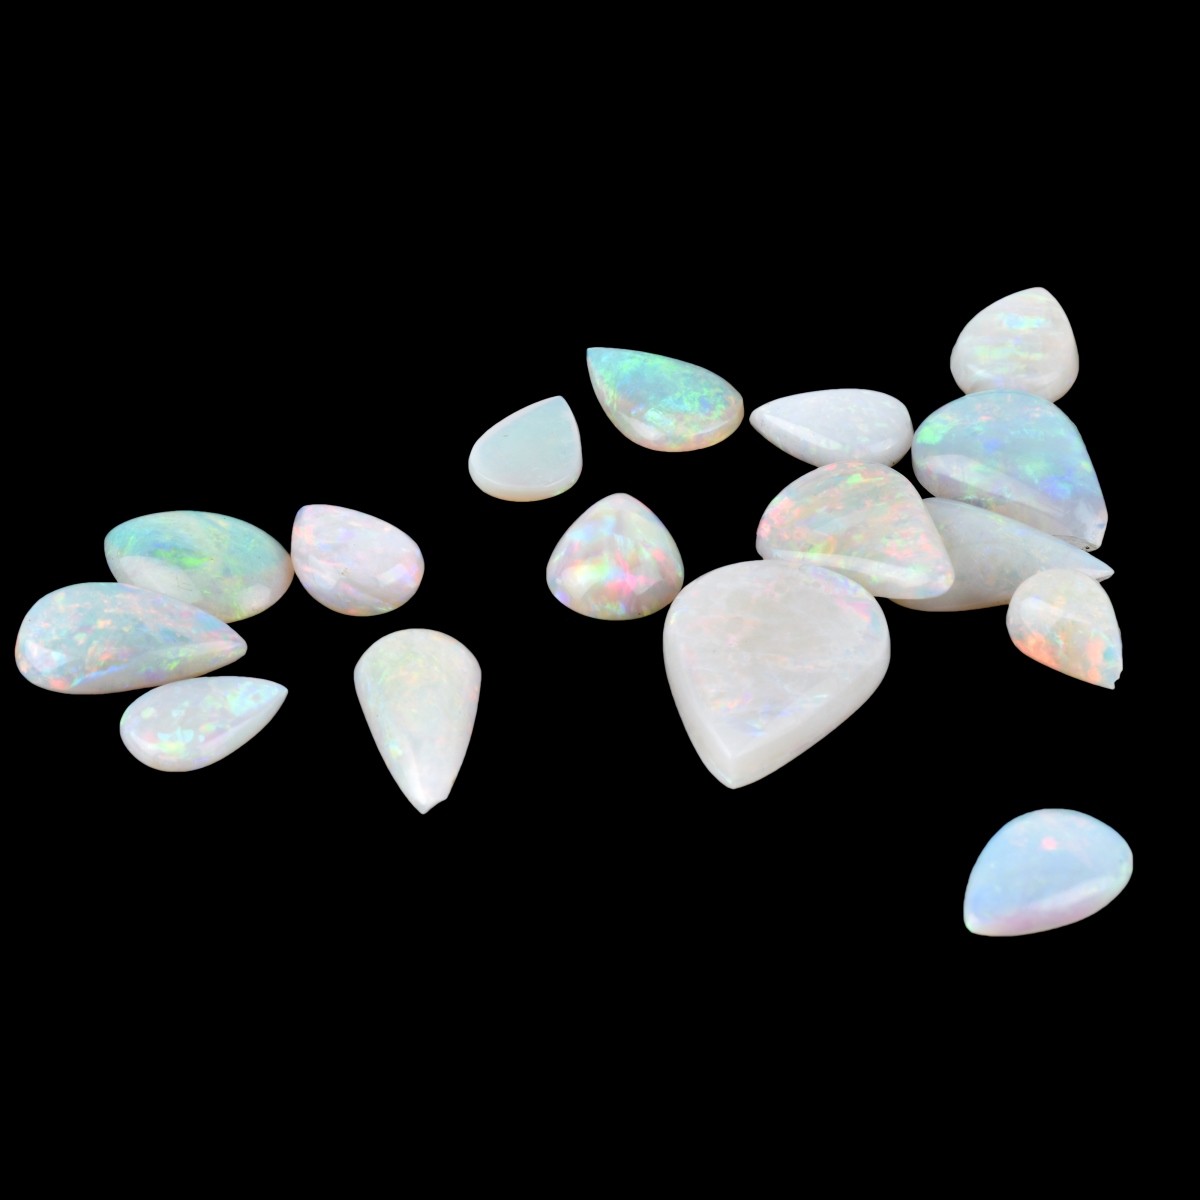 Collection of White Opals